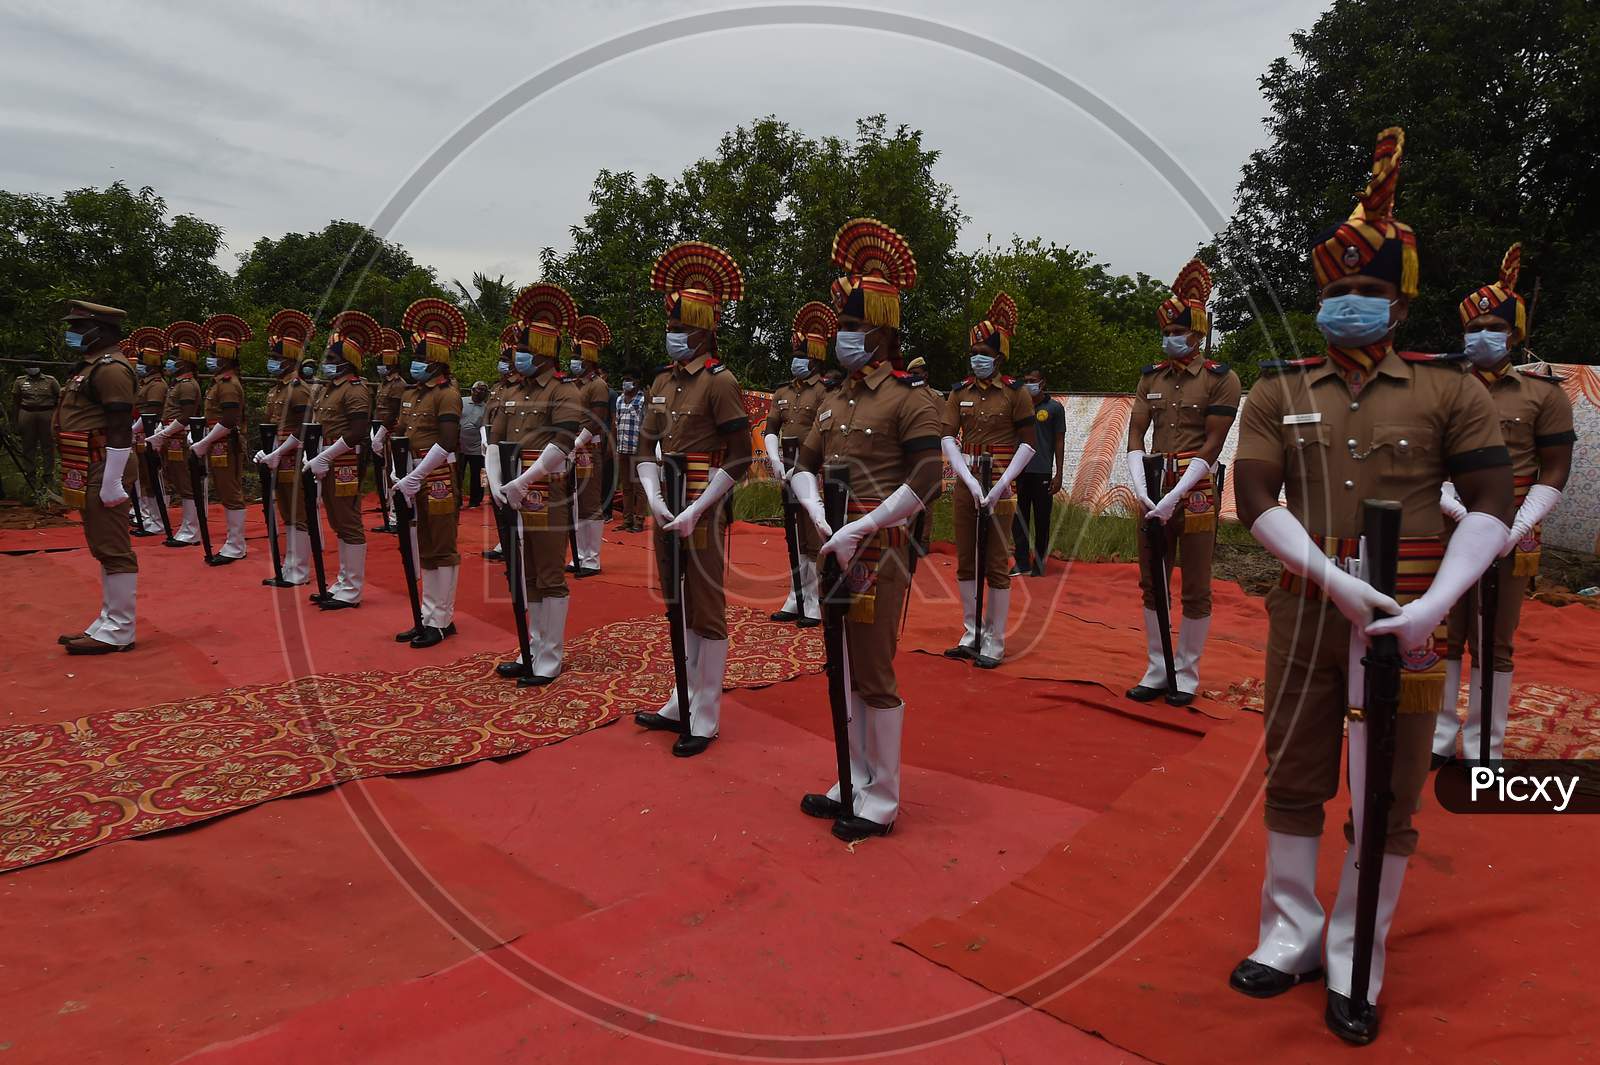 Tamil Nadu Police Personnel Pay Gun Salute Near The Mortal Remains Of Legendary Playback Singer Sp Balasubrahmanyam During His Funeral Ceremony, At His Farmhouse In Thamaraipakkam Village Of Thiruvallur District, Saturday